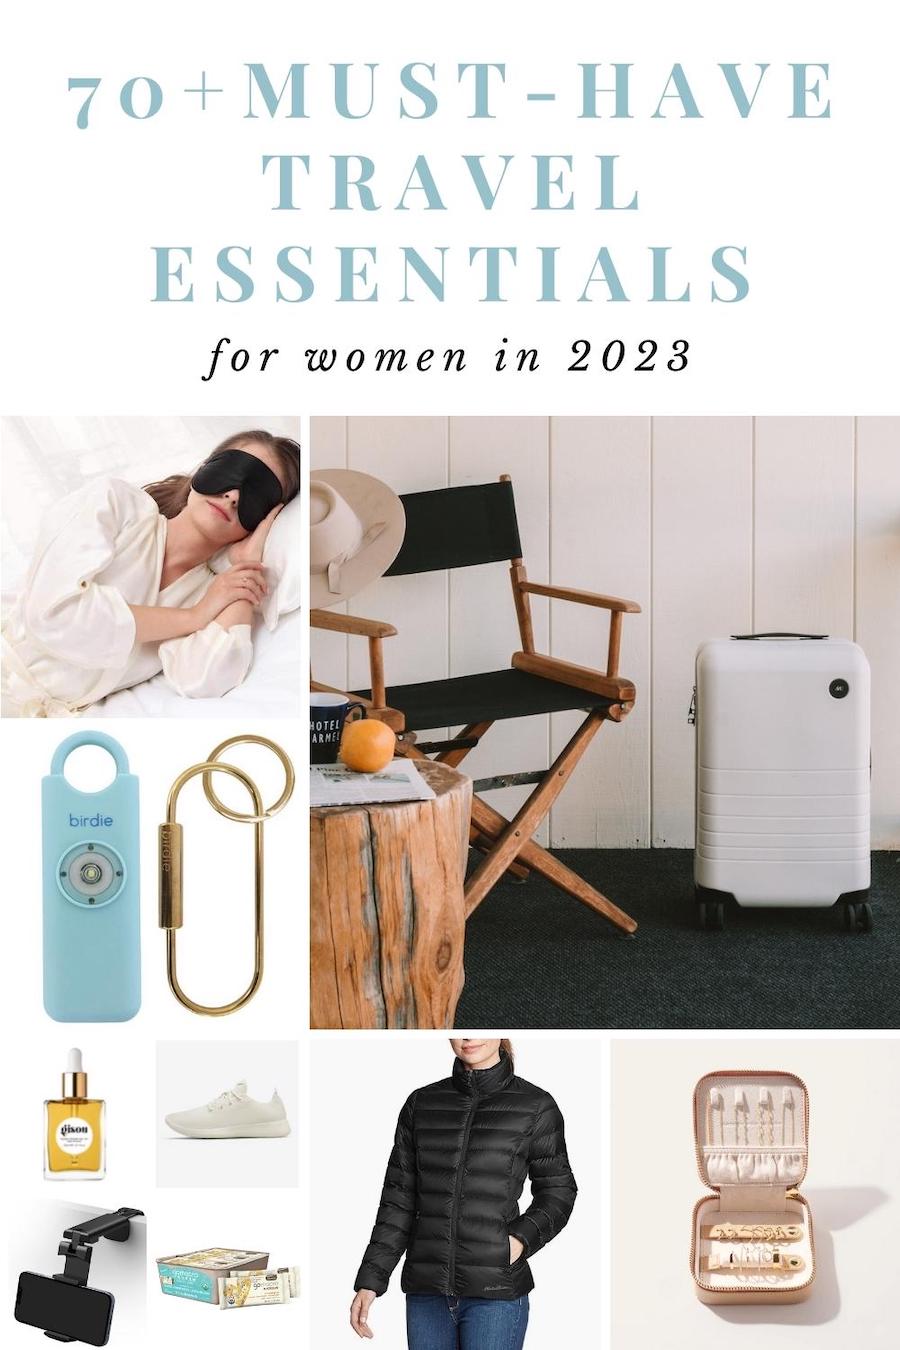 Ultimate Travel Essentials Packing List | Travel Essentials for Women